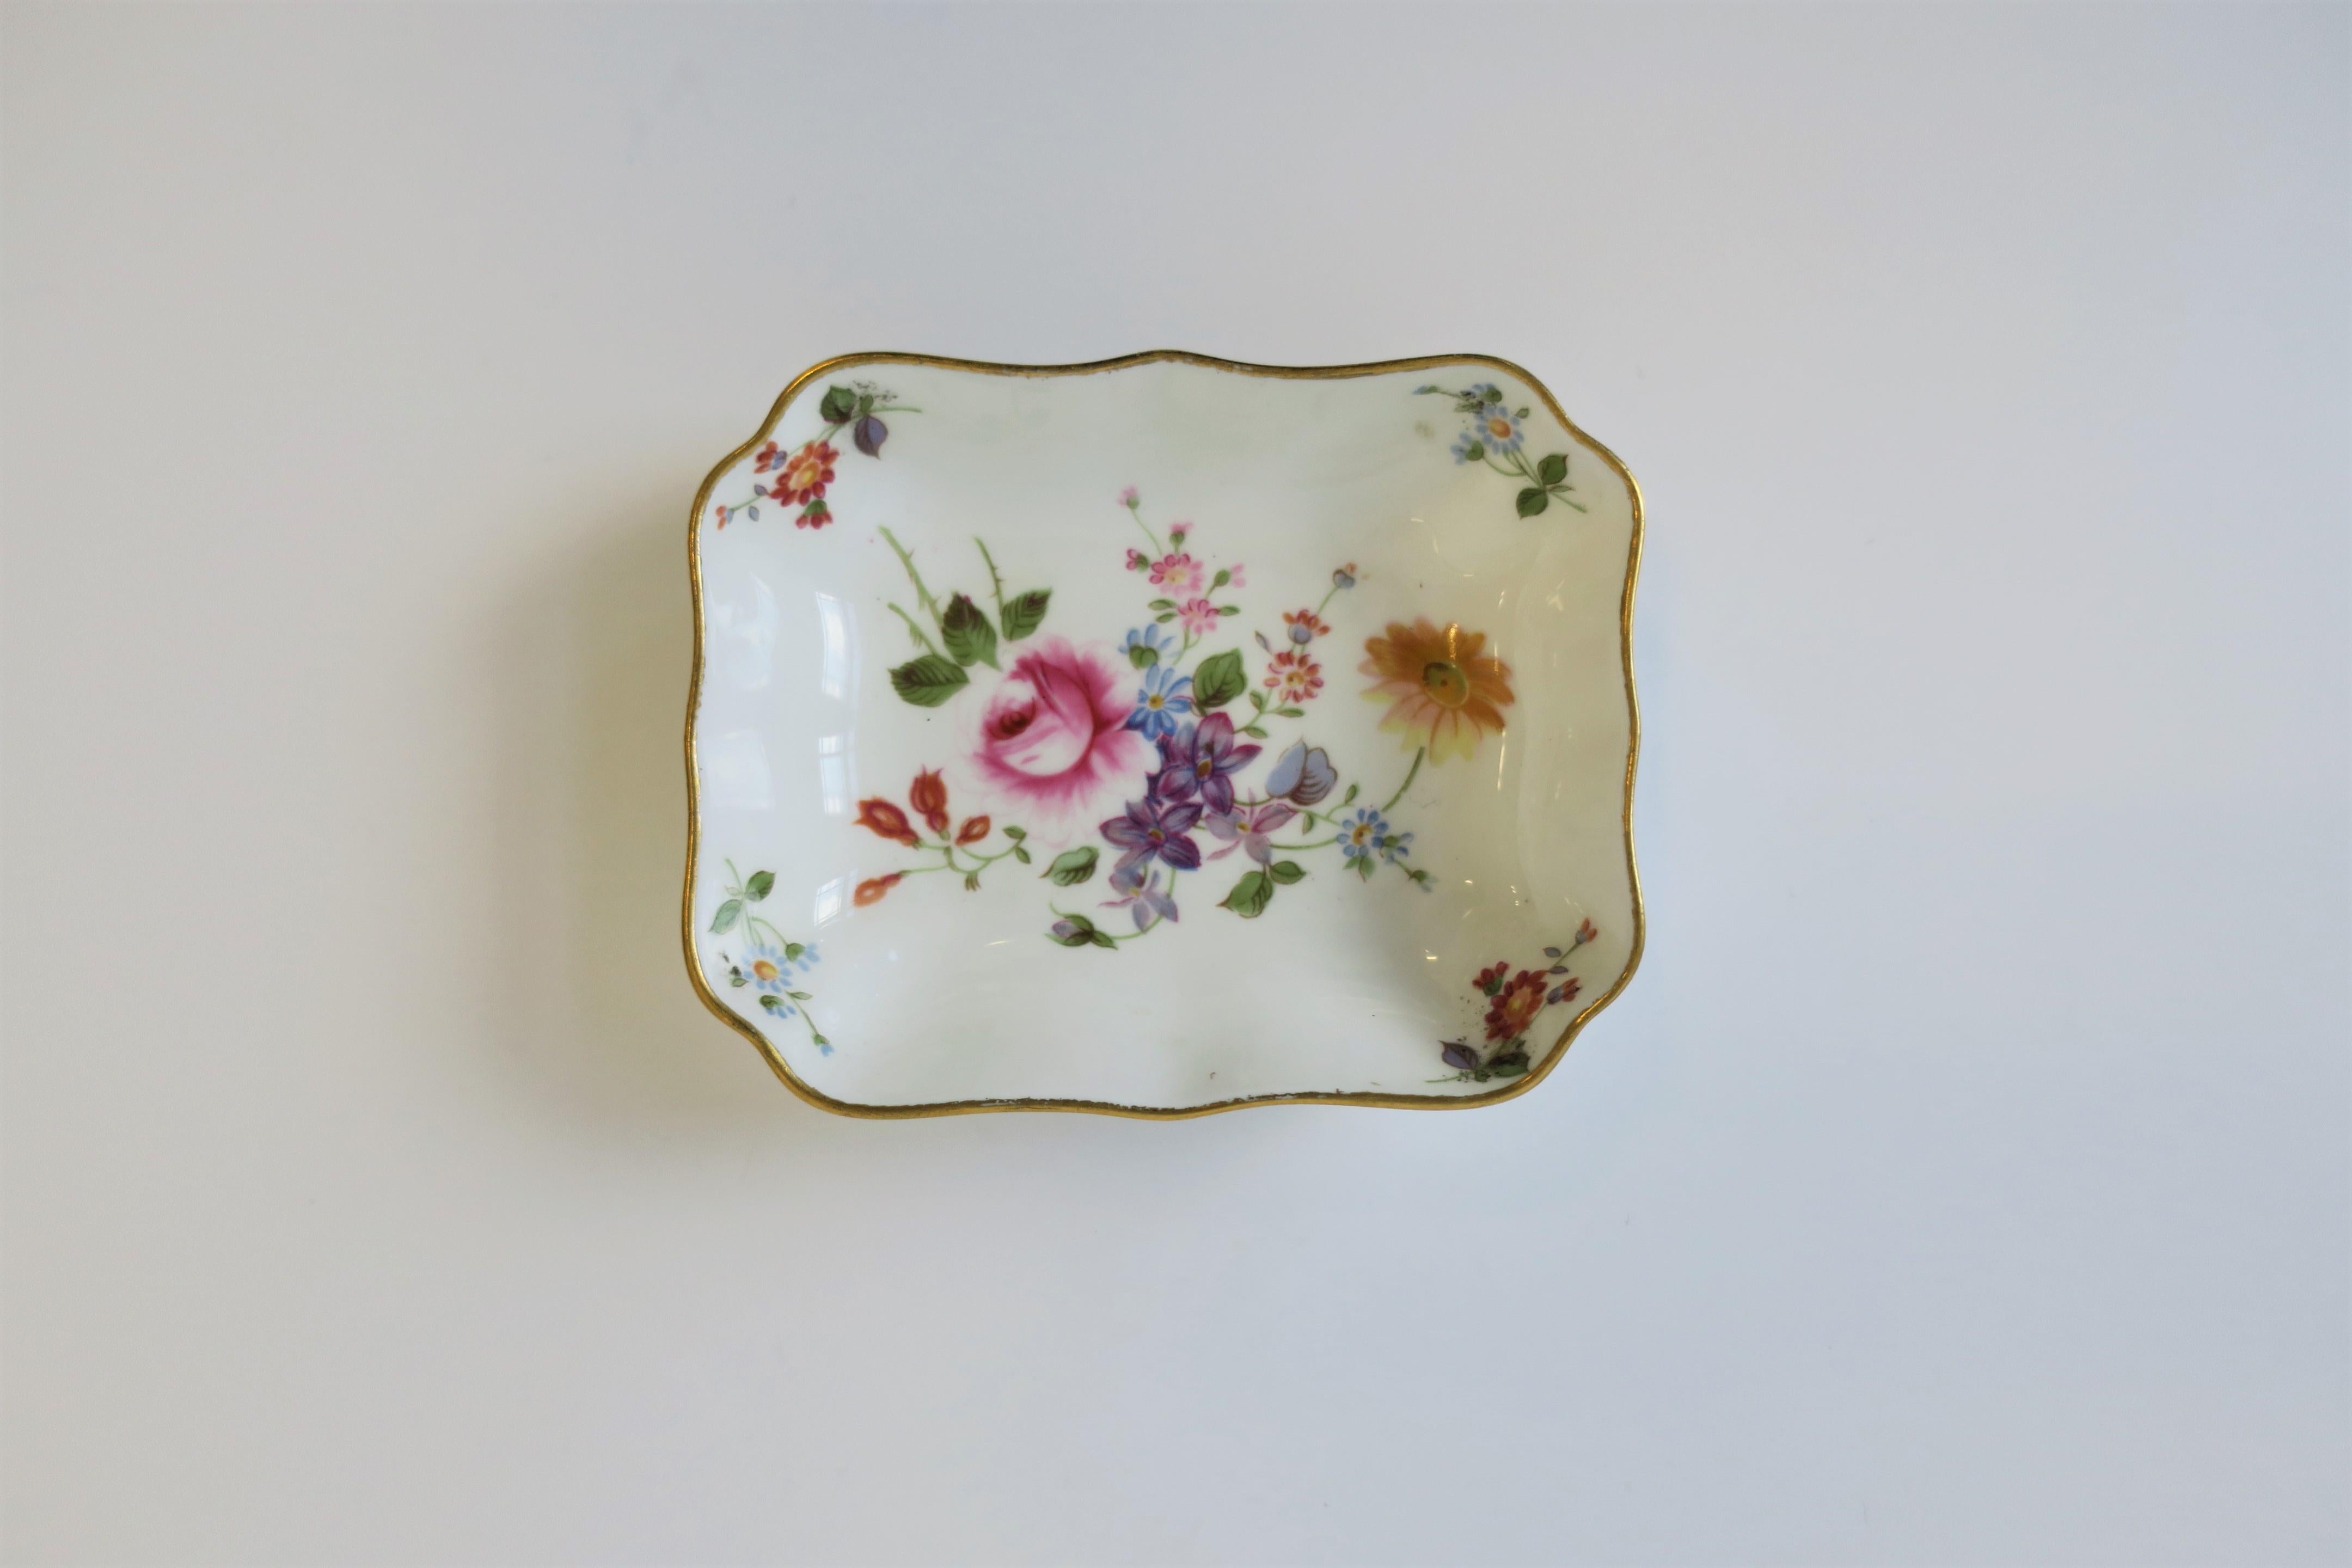 An English white porcelain jewelry dish by Royal Crown Derby with colorful floral 'chintz' design, circa 20th century, England. Great for a vanity, nightstand, bedside, etc. 

Dimensions: 3